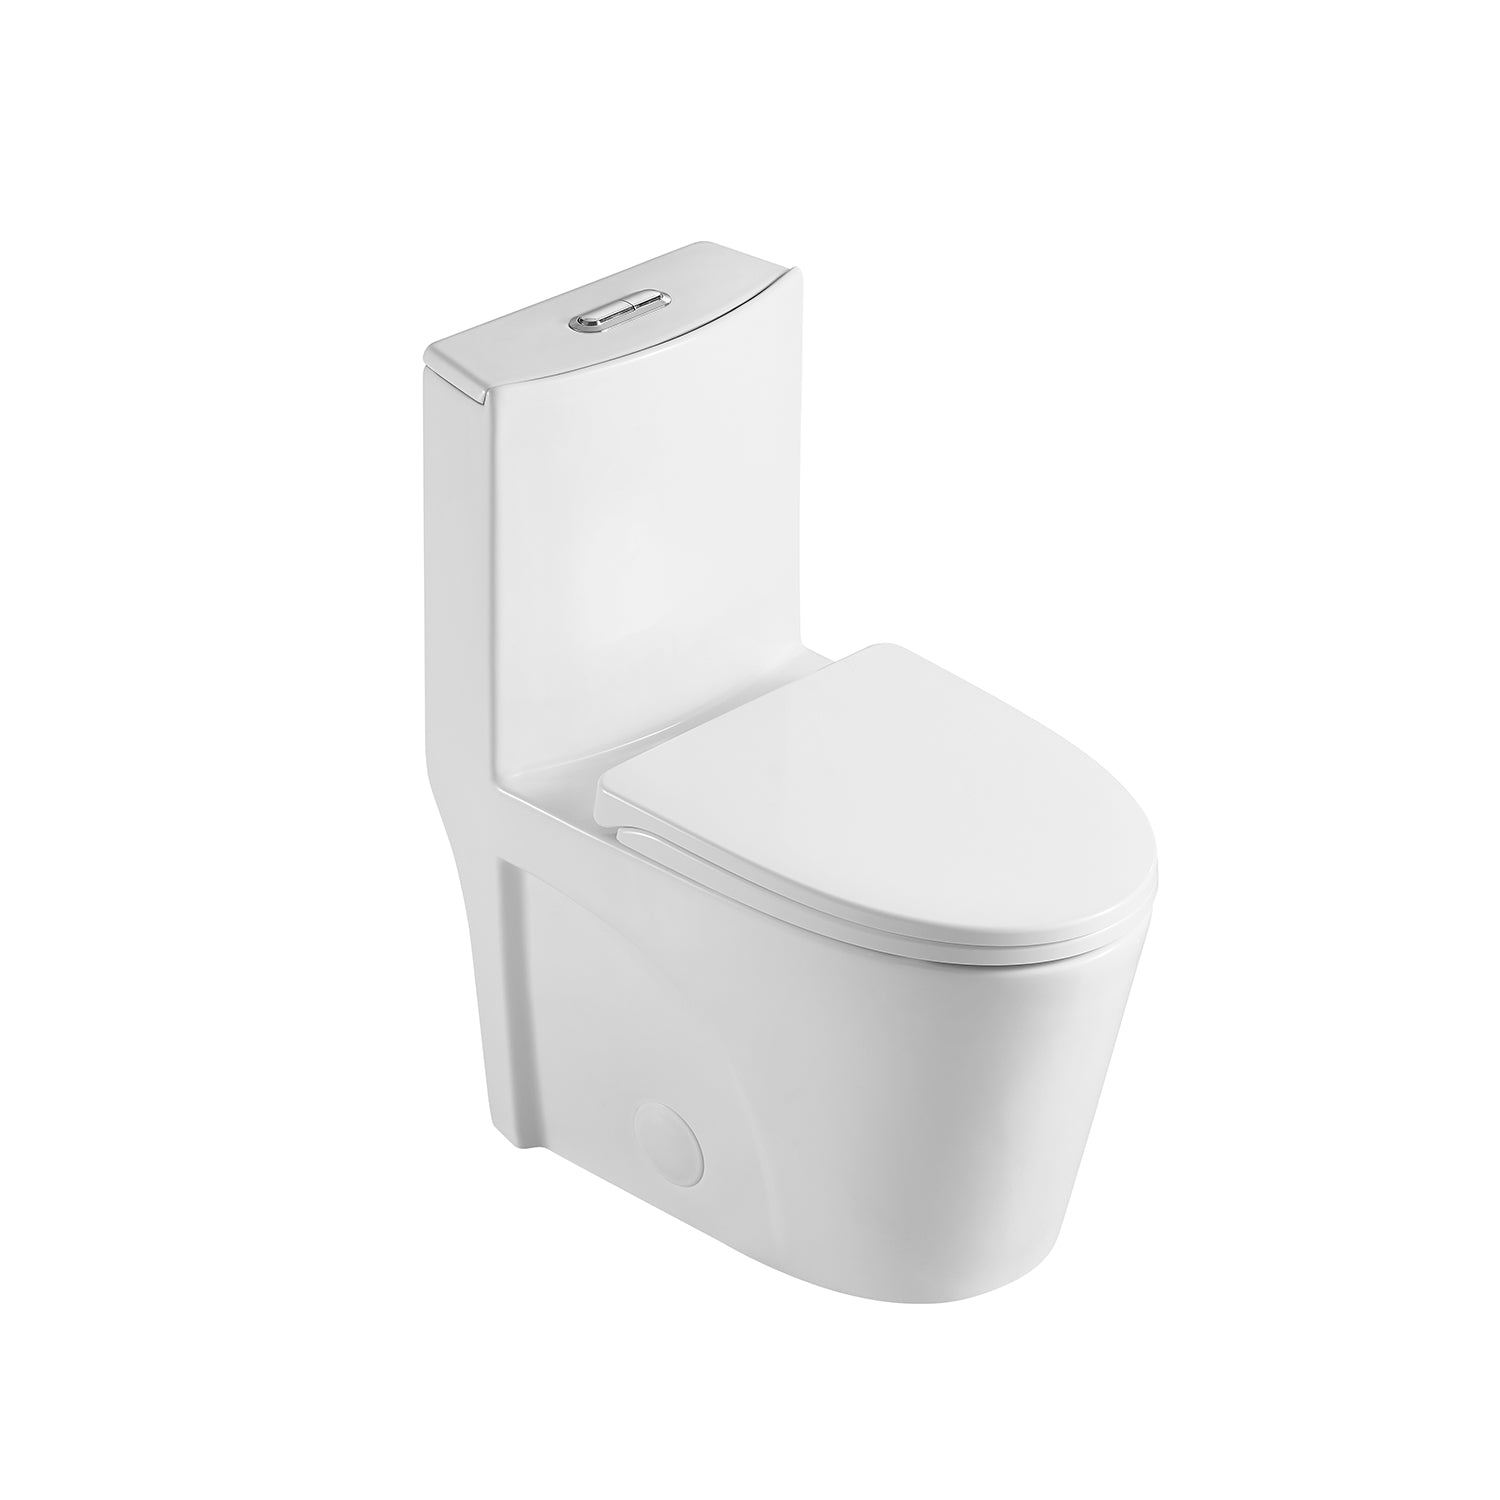 DAX One Piece Oval Toilet with Soft Closing Seat and Dual Flush High-Efficiency, Porcelain, White Finish, Height 31 Inches (BSN-CL12011)